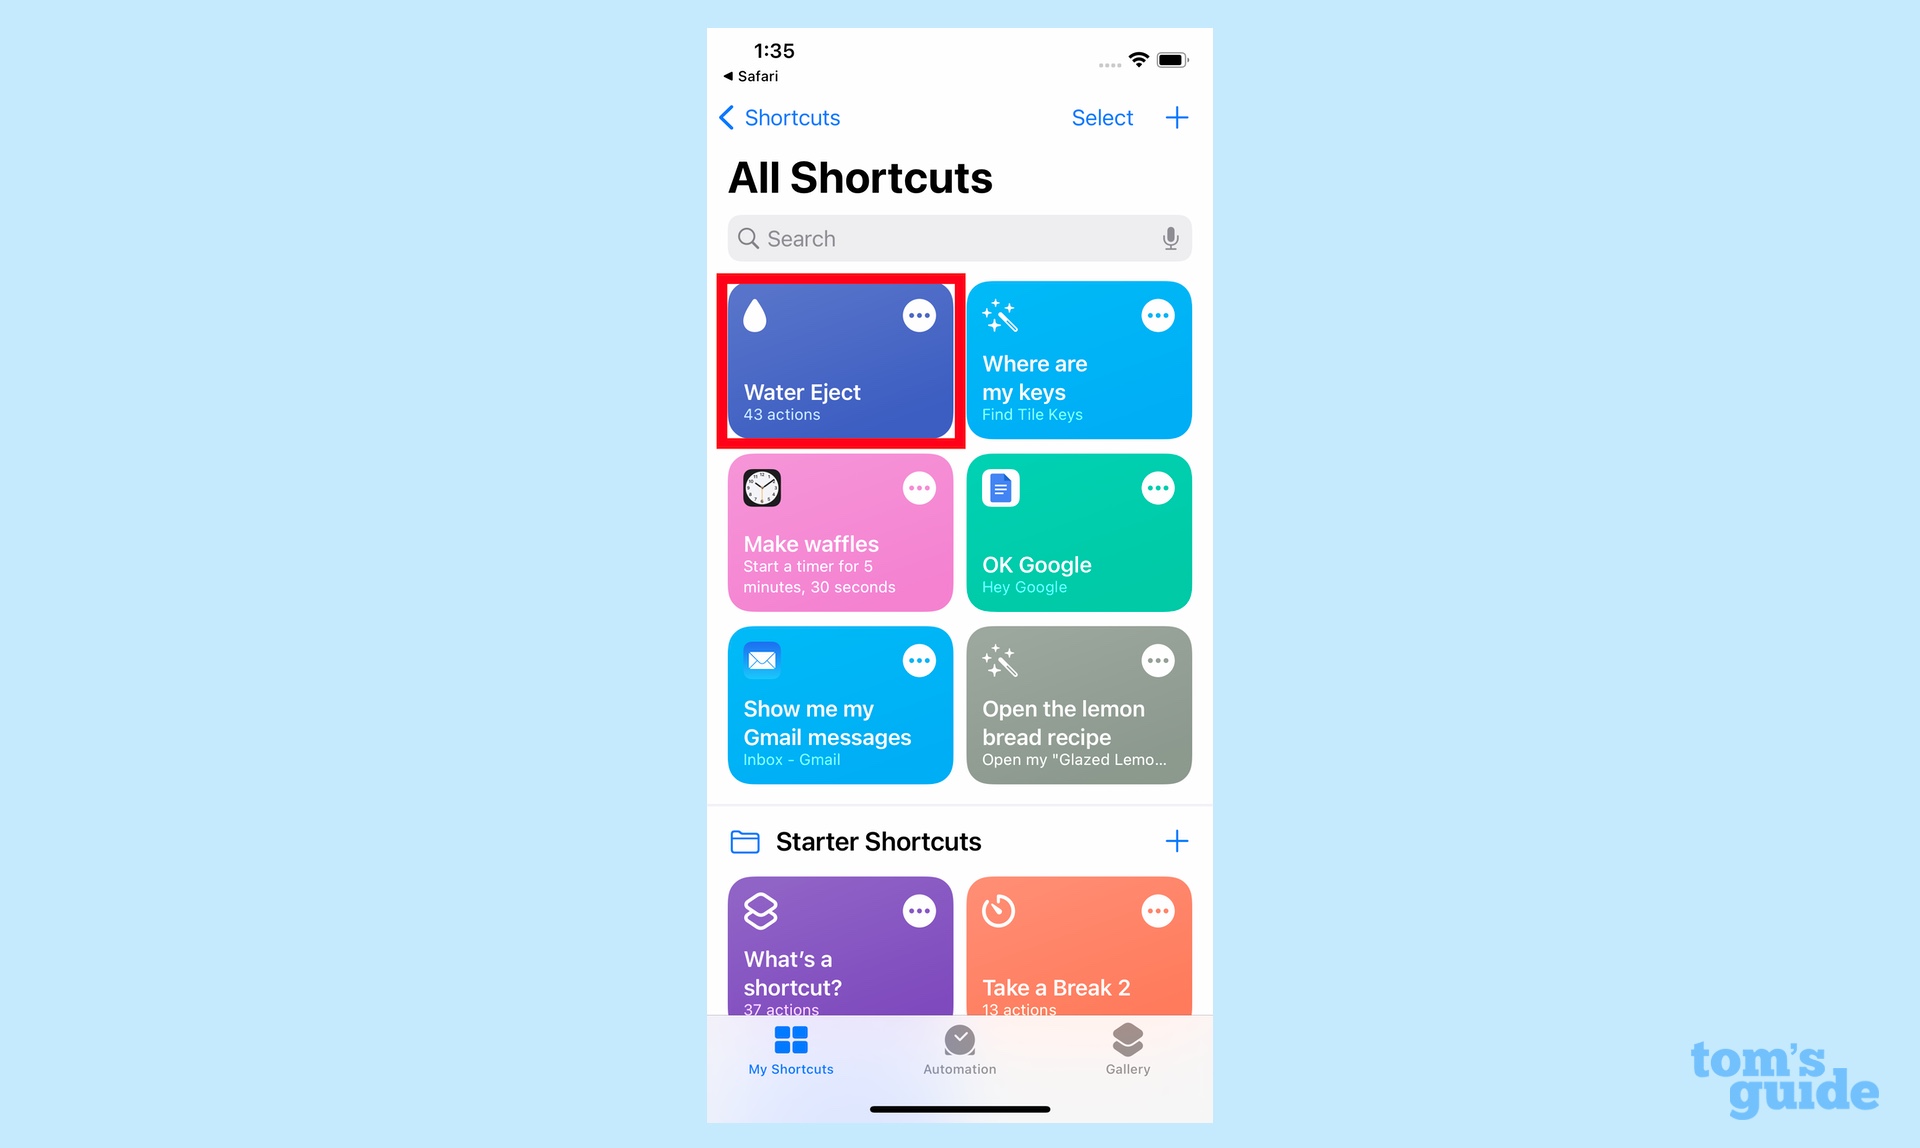 How vĩ đại eject water from an iphone: Water Eject in Shortcuts app